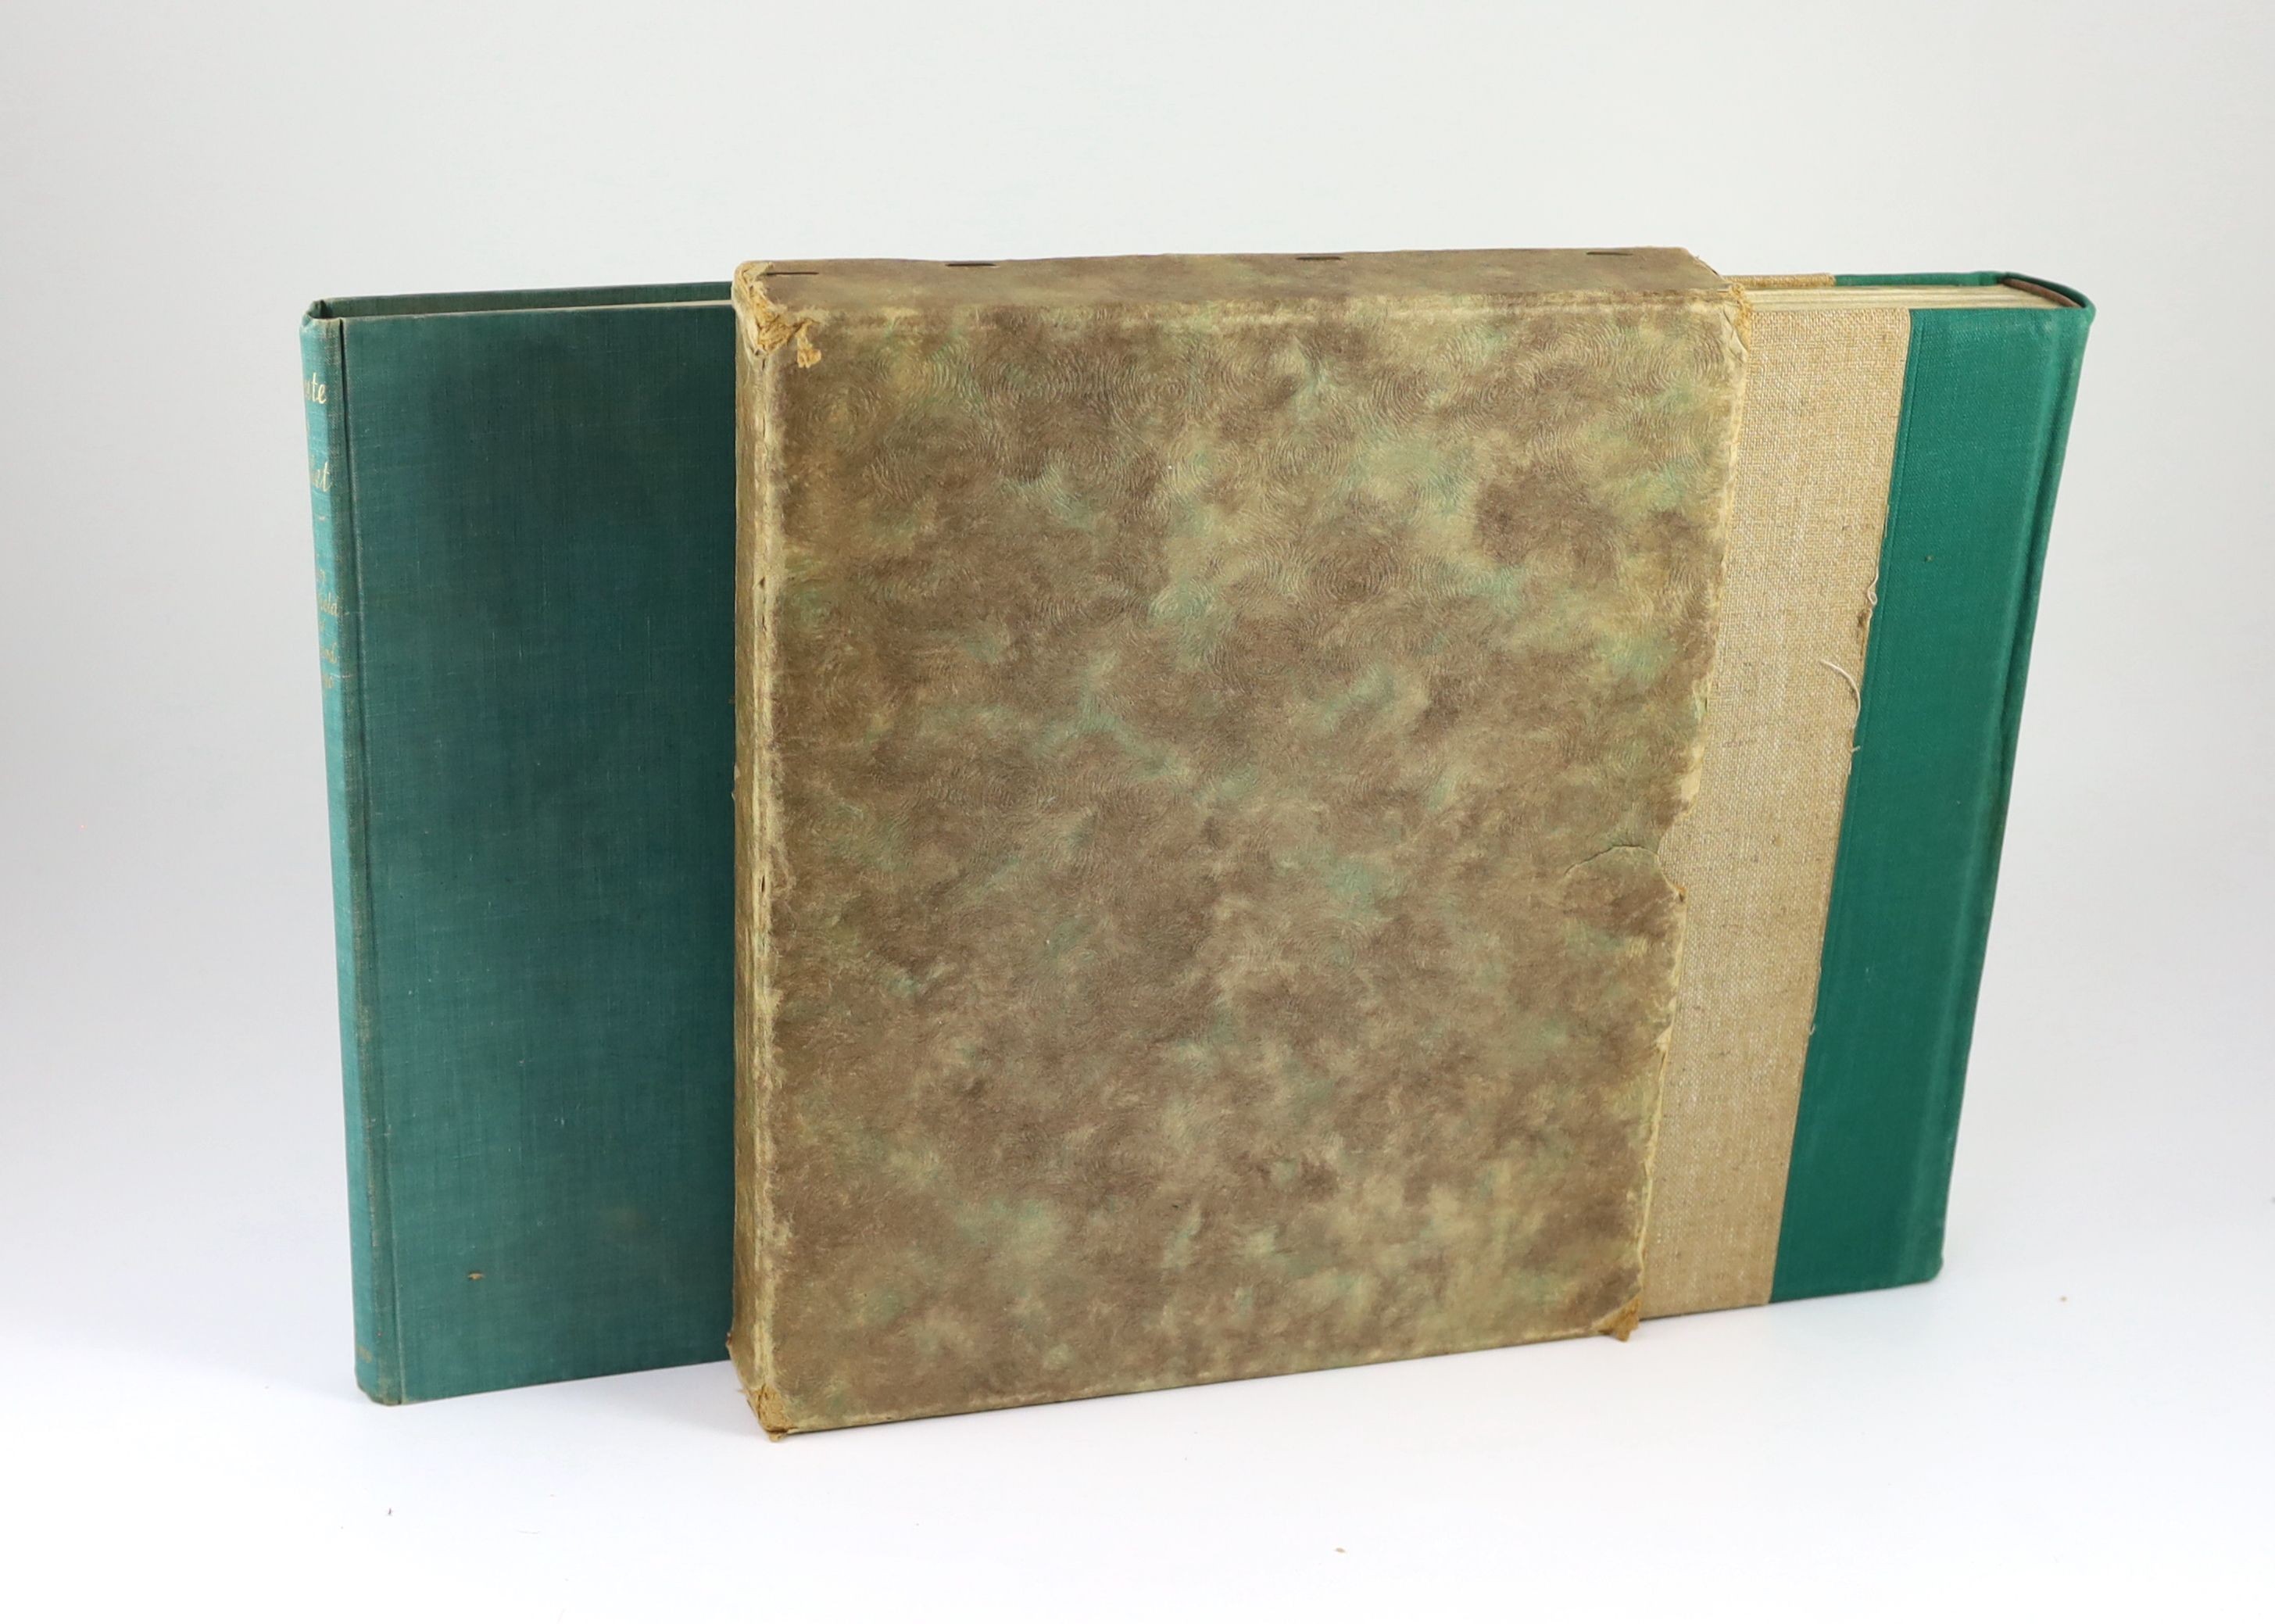 Masefield, John - The Country Scene, 1st edition, illustrated with 42 coloured plates by Edward Seago, 4to, half cloth, Collins, London, 1937 and Tribute to Ballet, illustrated by Edward Seago, Collins, London, 1938 (2)